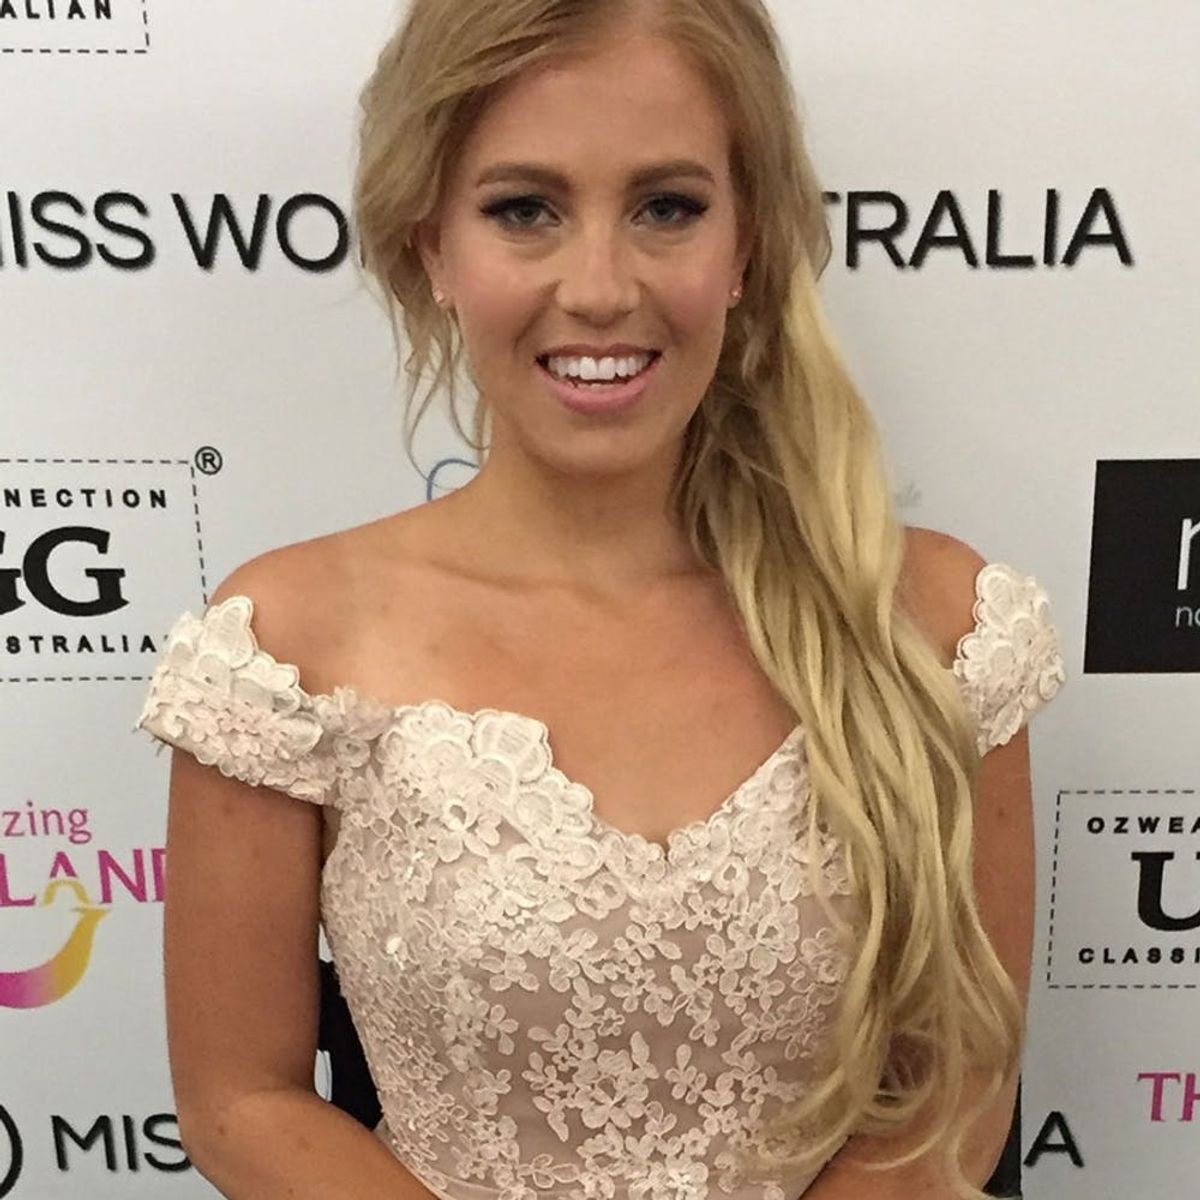 Australia’s Contestant in the Miss World Competition Just Broke a Major Pageant Boundary